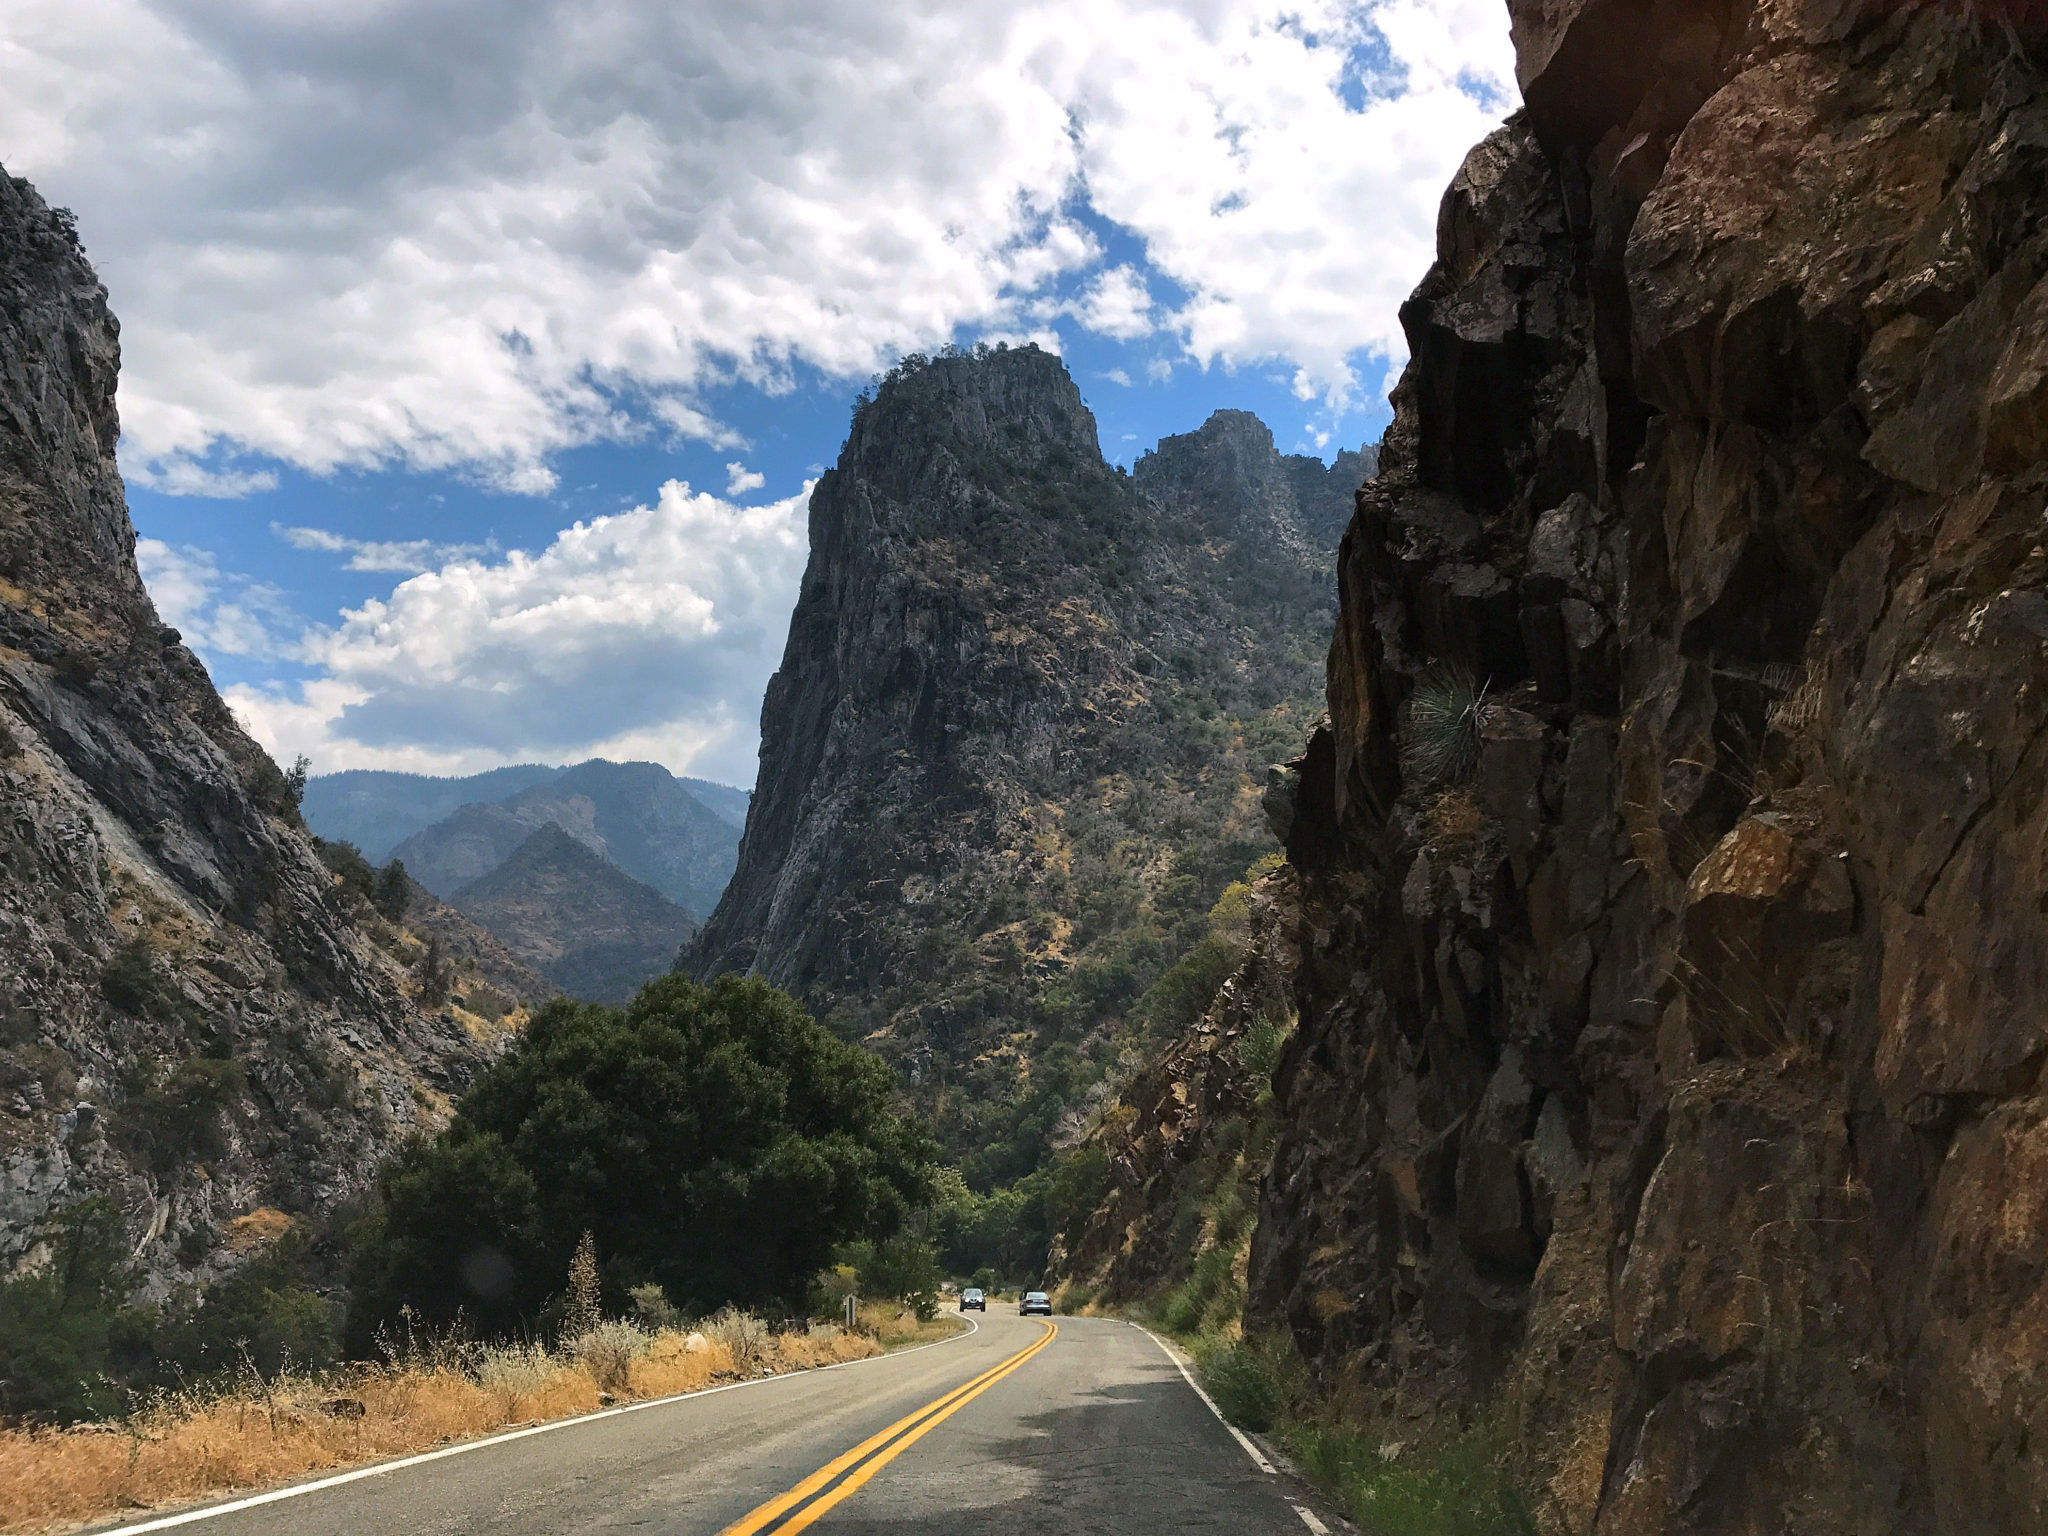 On the Kings Canyon Scenic Byway